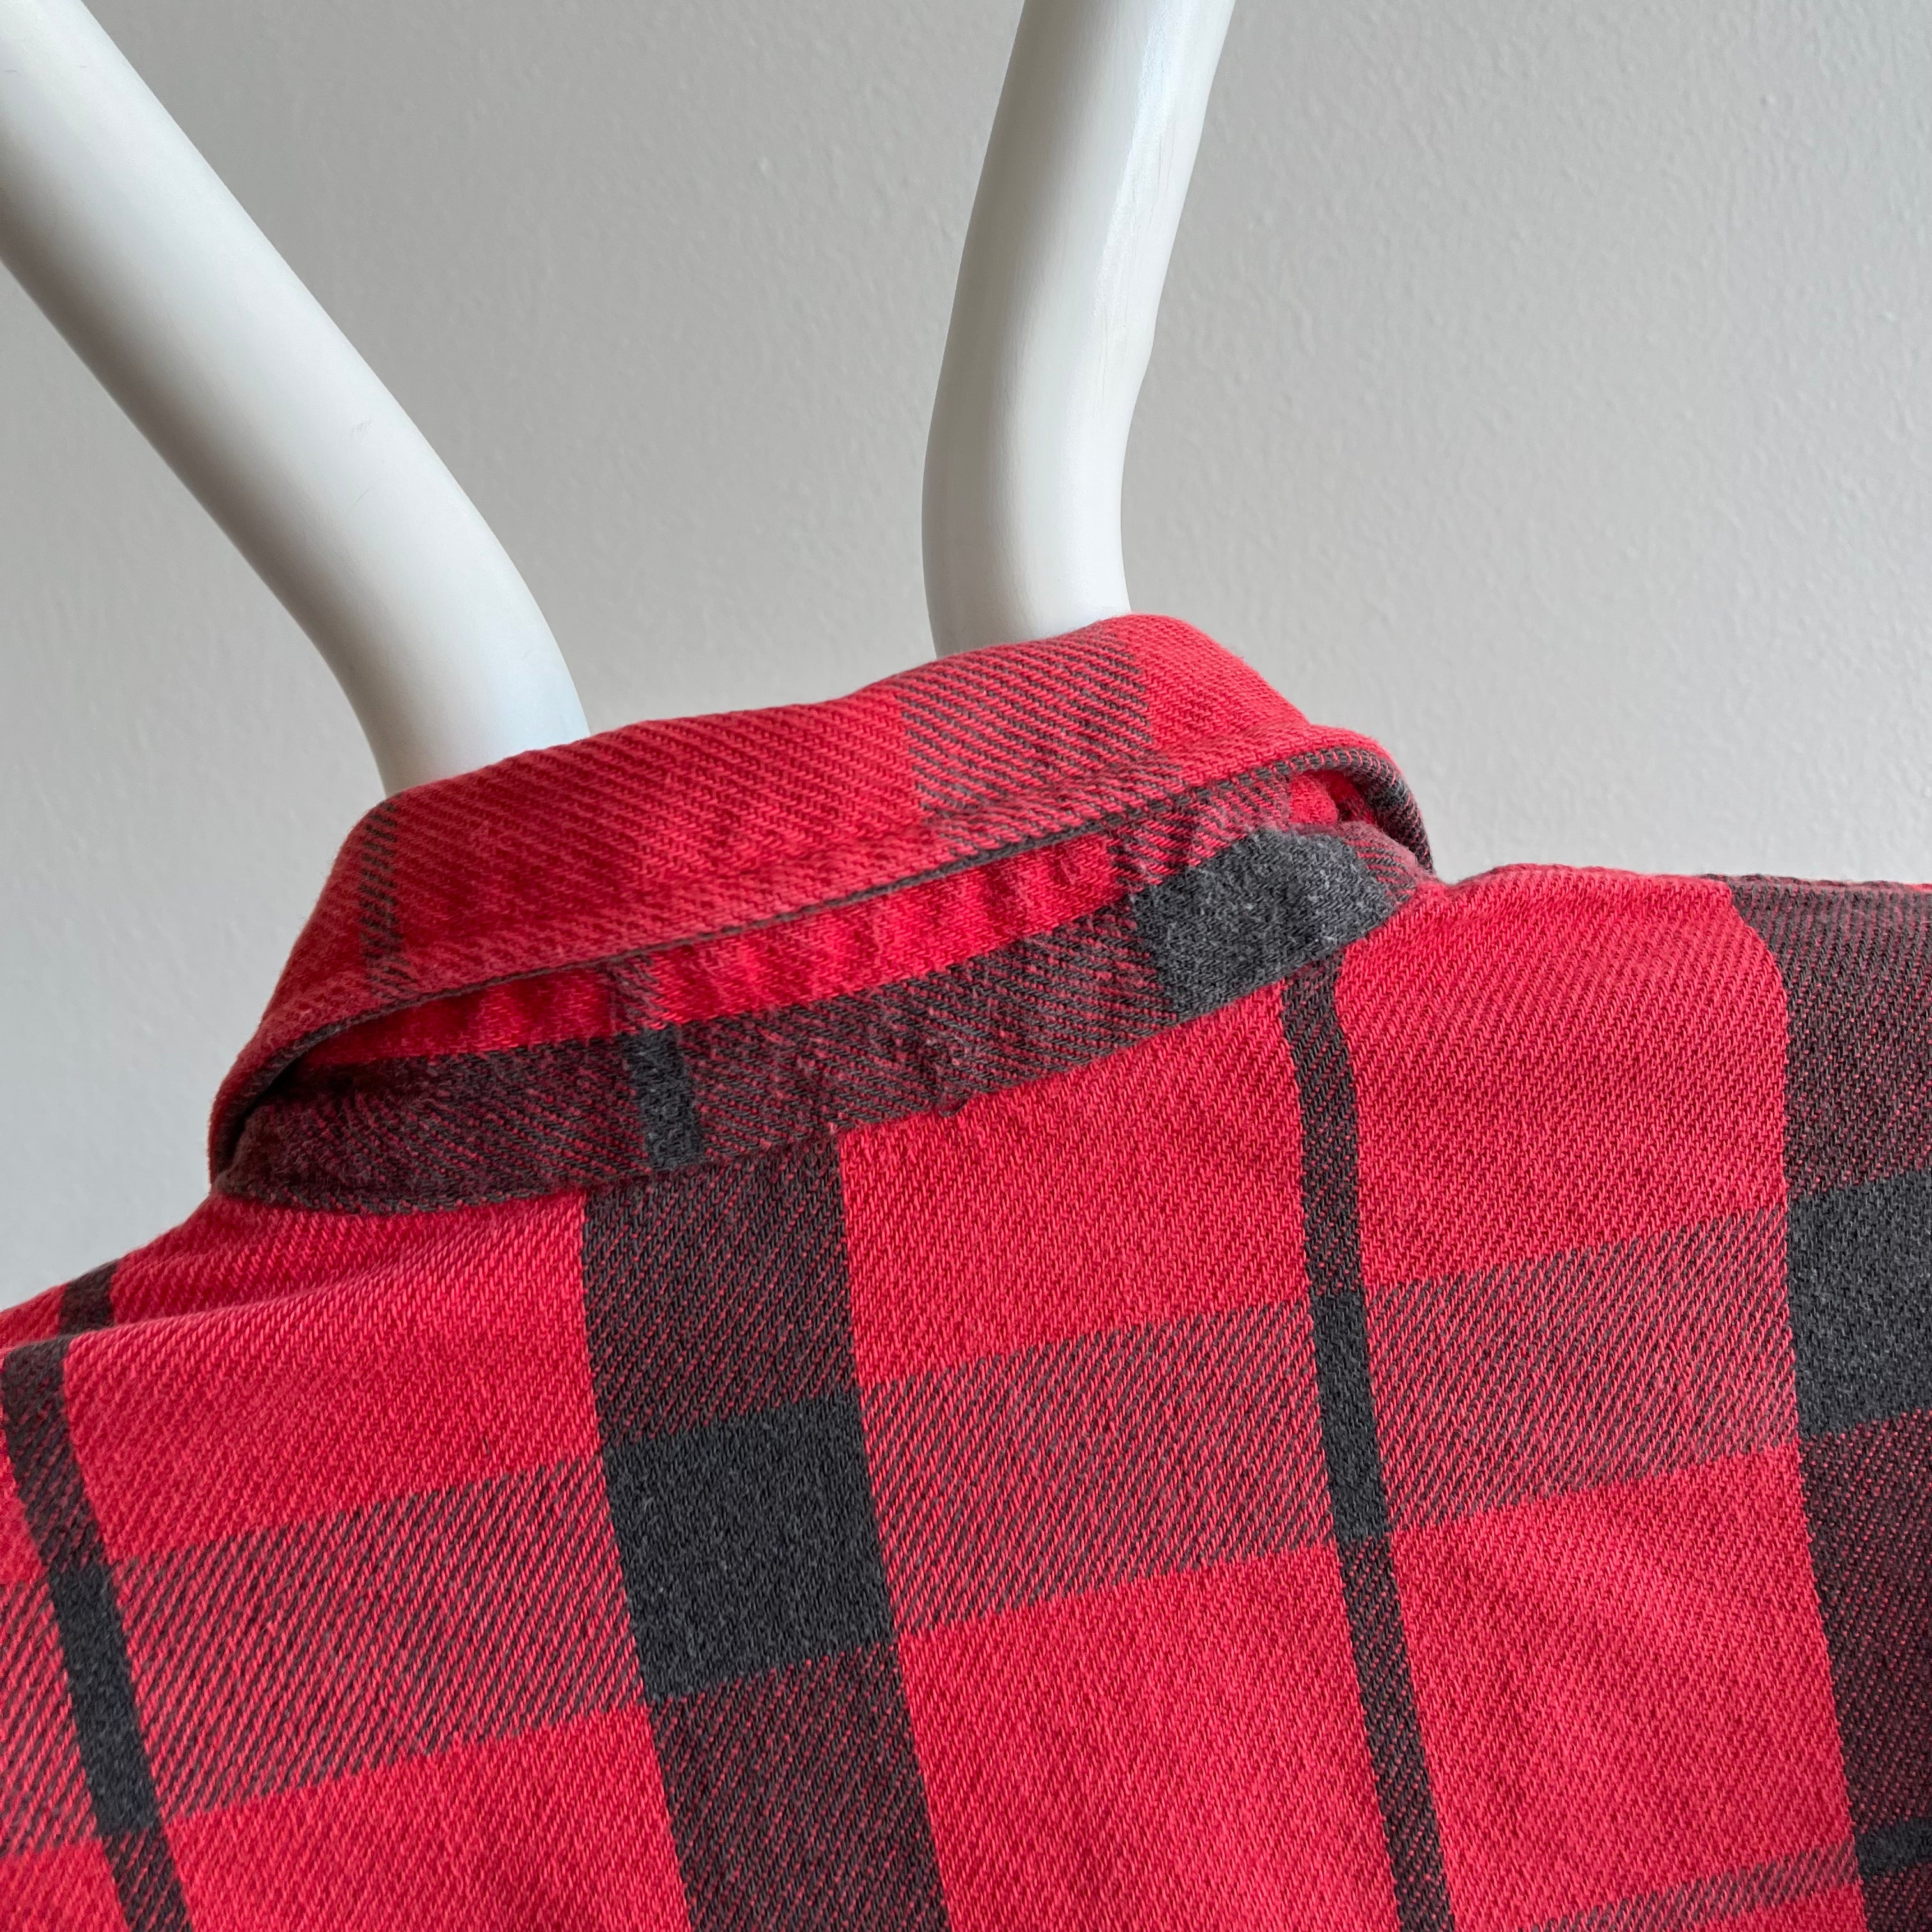 1980s/90s Big Mac by St. John's Bay Cotton Flannel with Mending